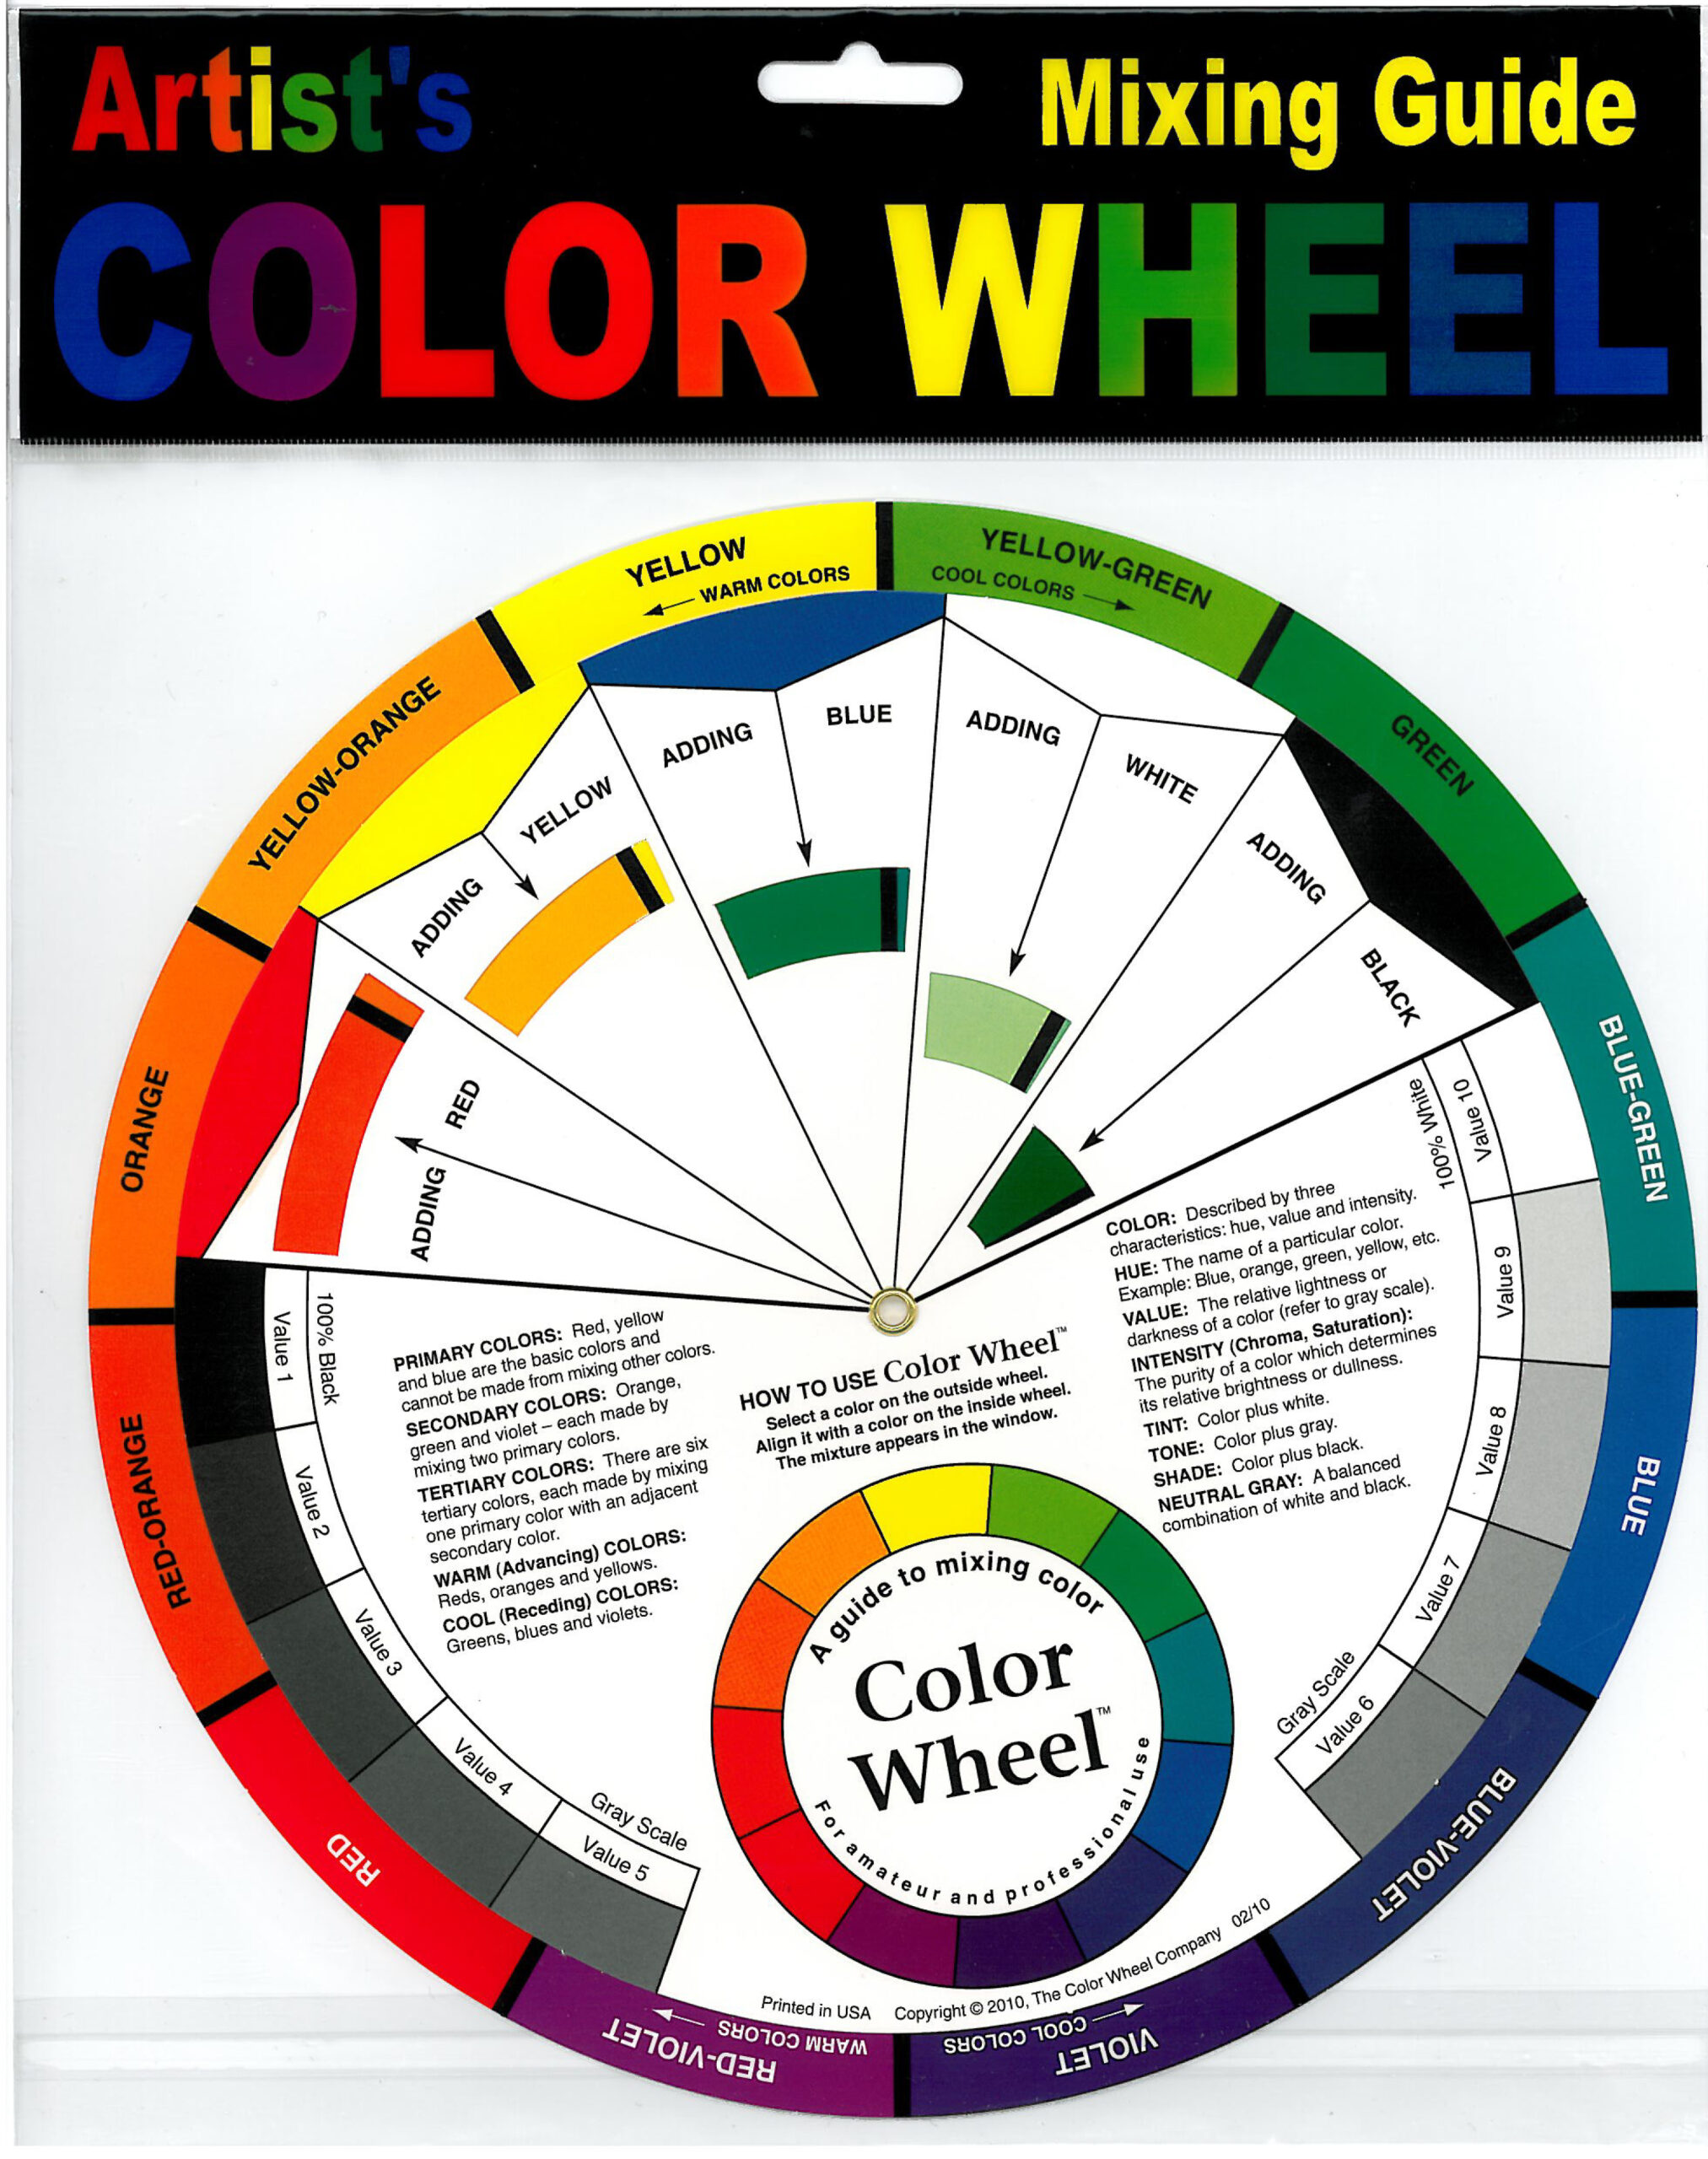 Artists Color Wheel scaled